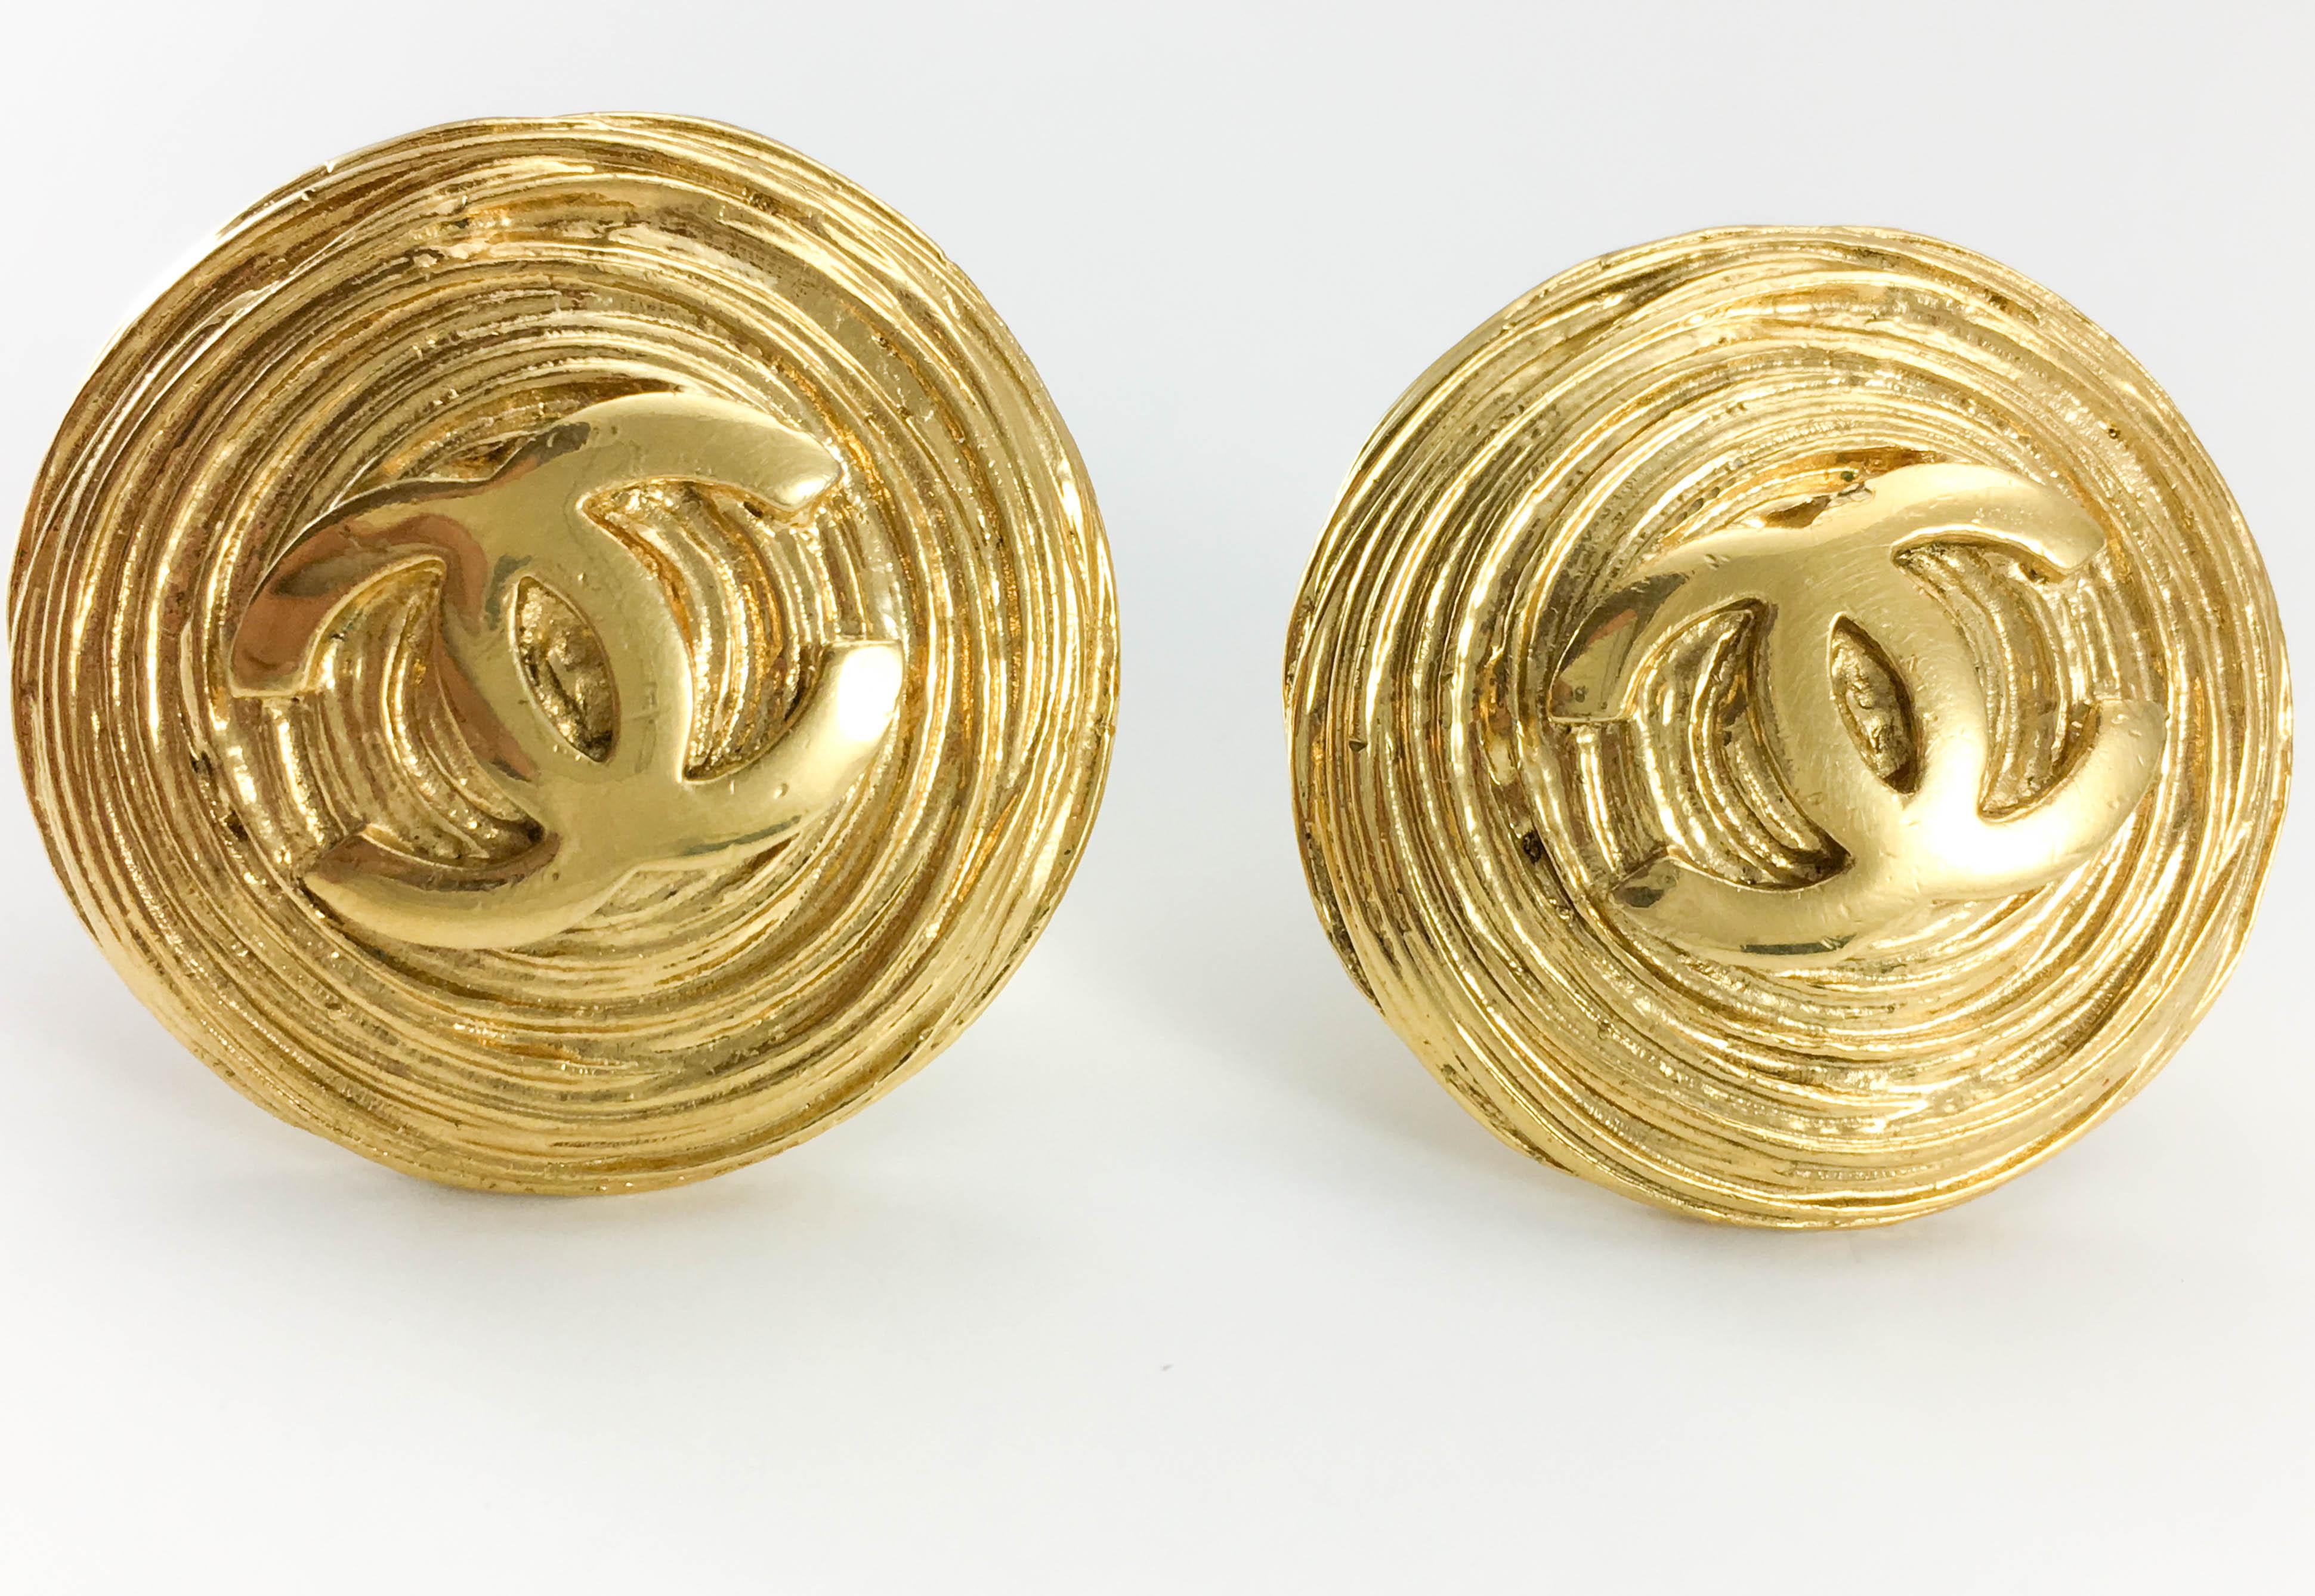 1988 Chanel Large Gold-Plated Textured Round Logo Earrings In Excellent Condition For Sale In London, Chelsea